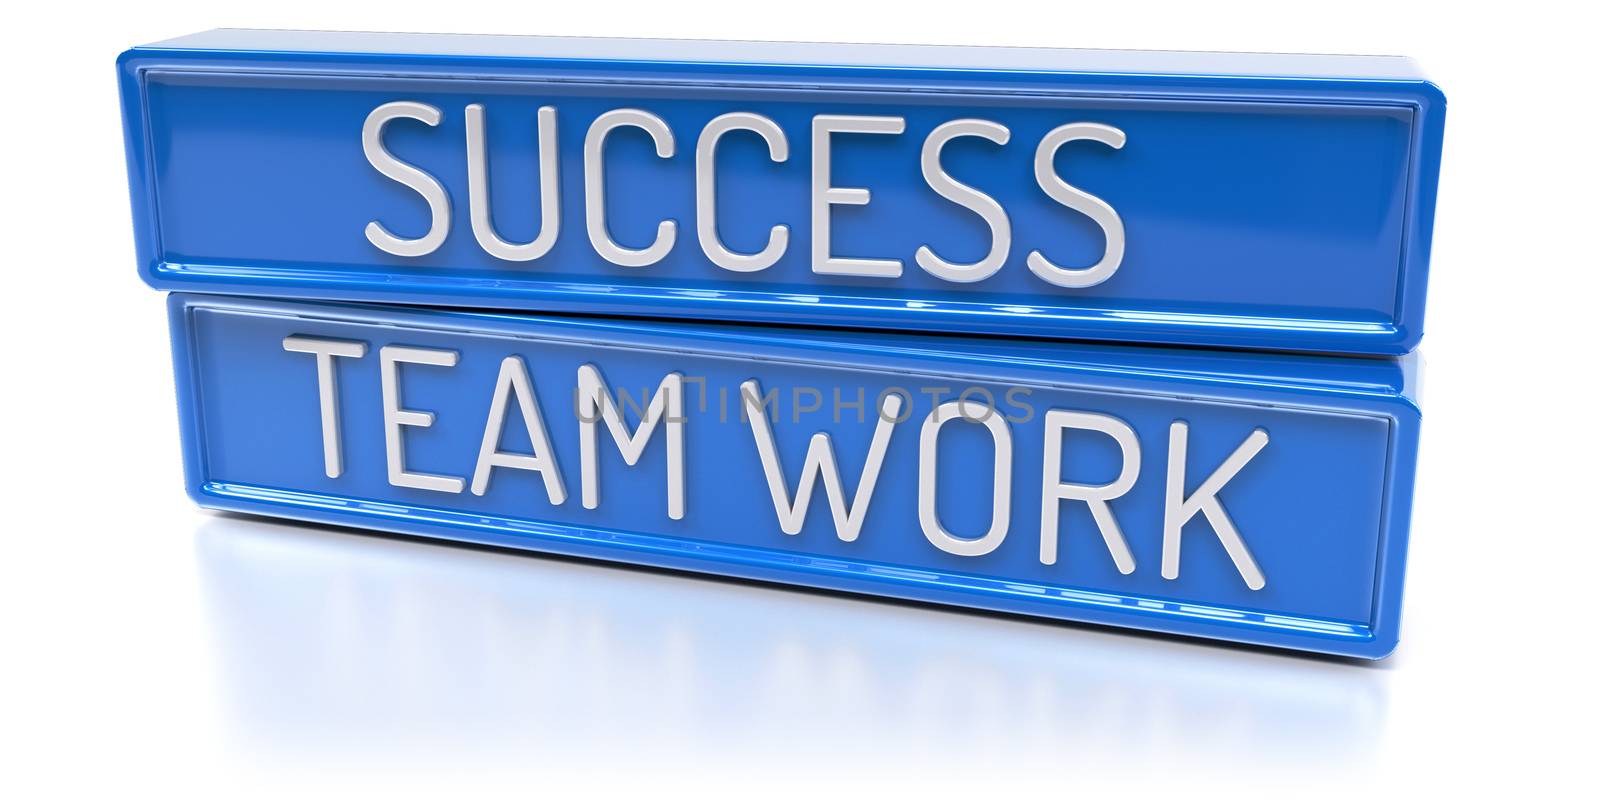 Success Team Work - Blue banners with text - Isolated 3D Render